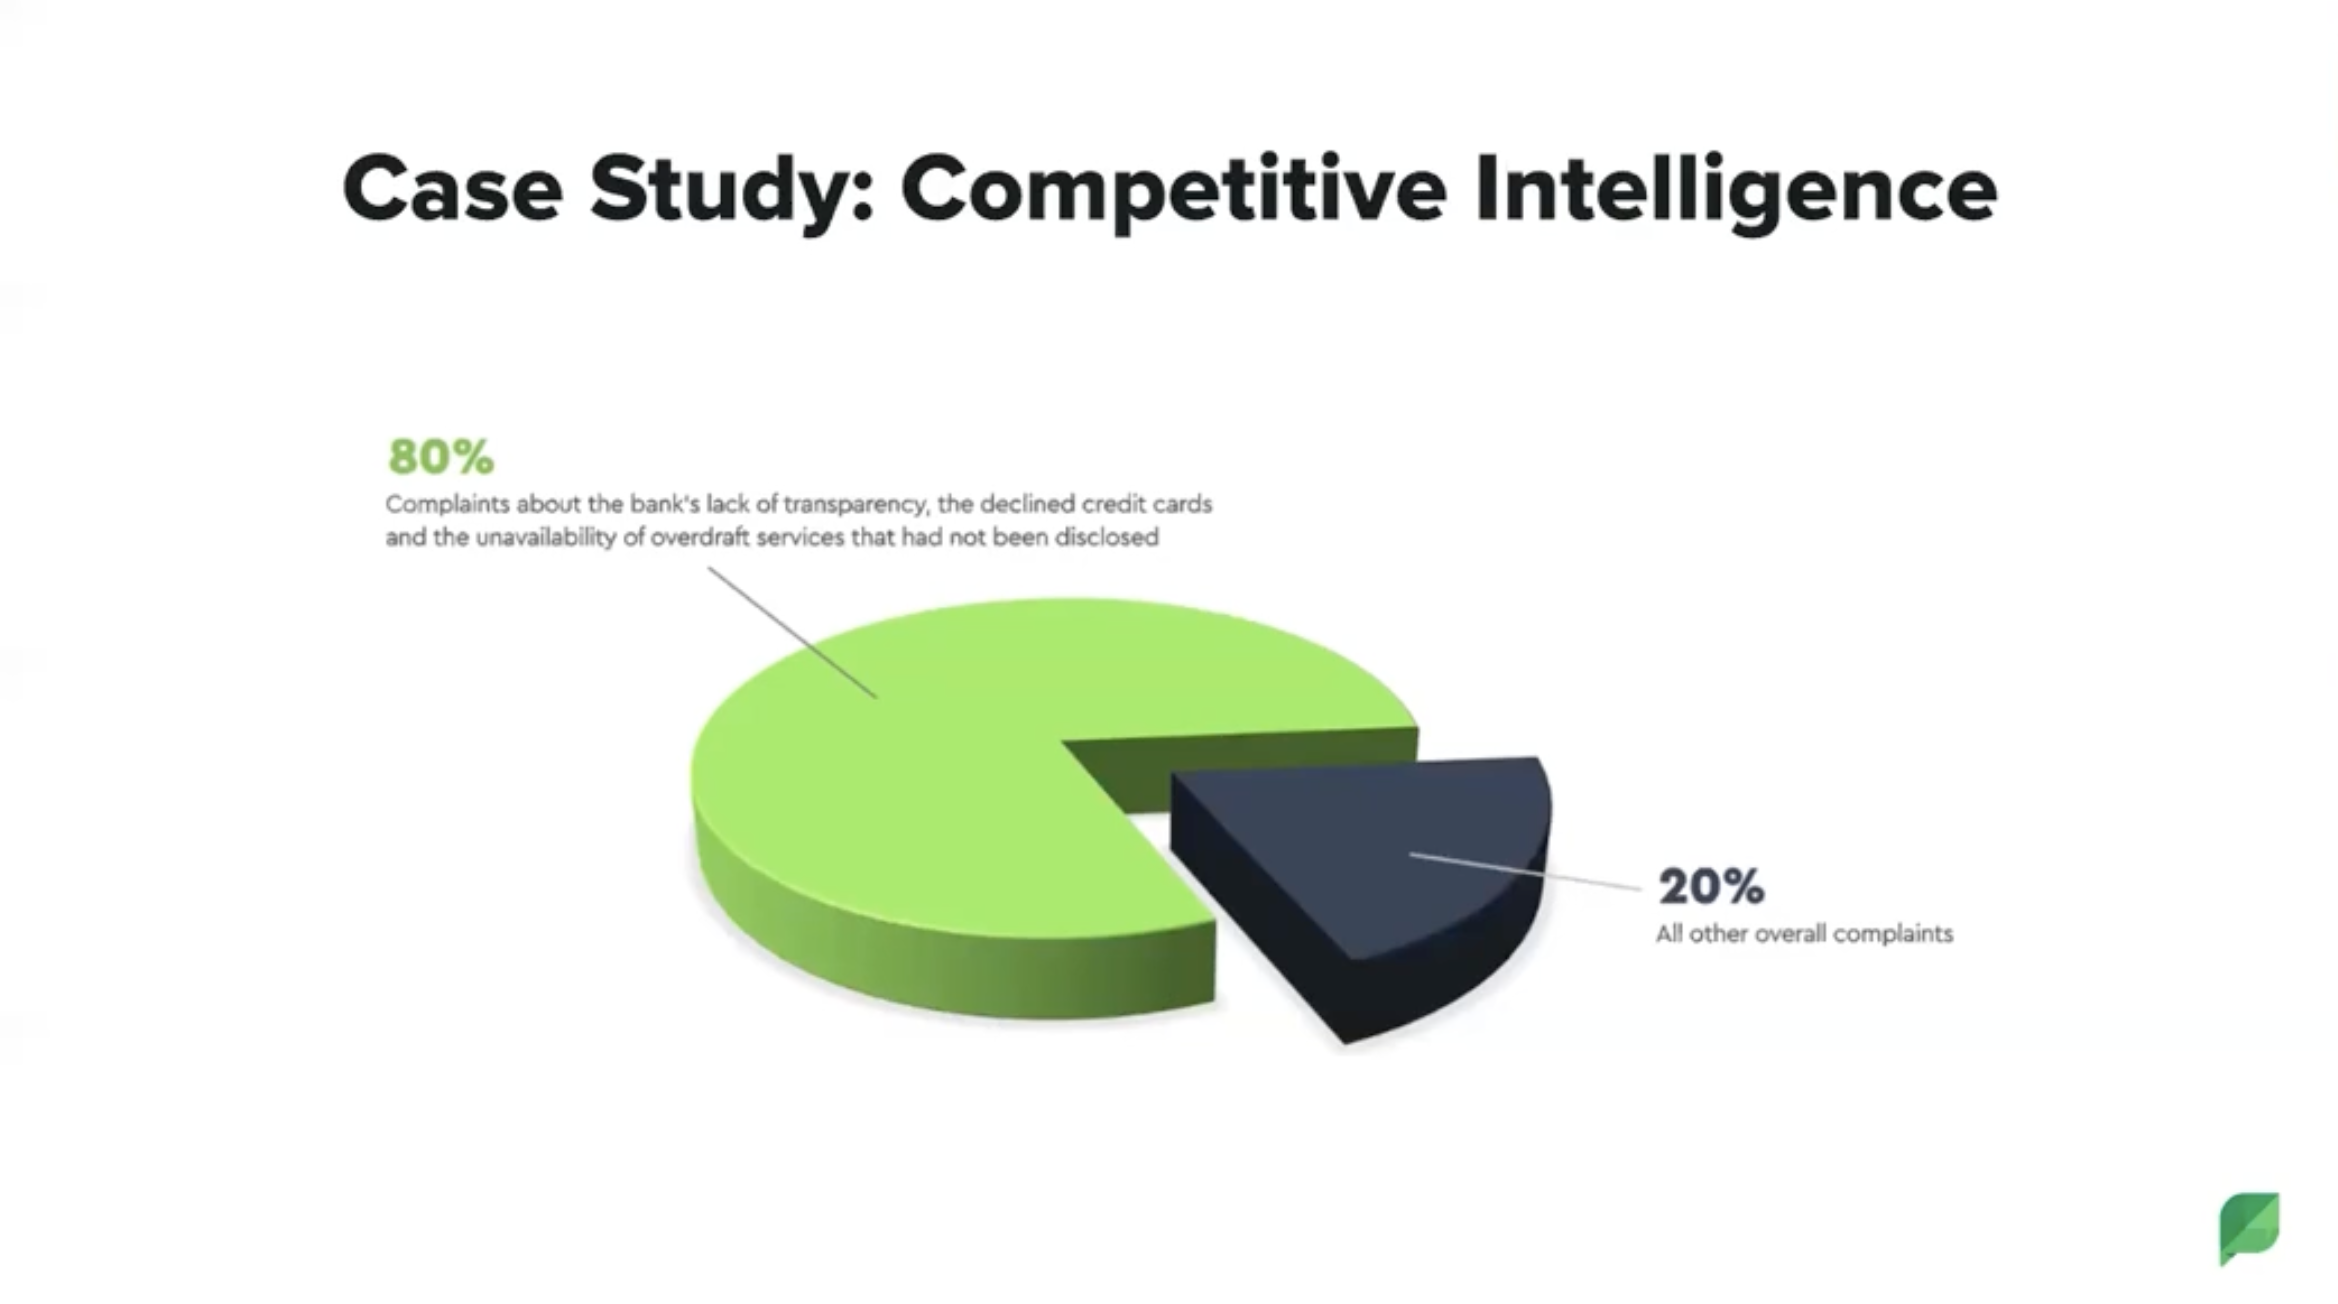 A chart showing data from a competitive intelligence case study.